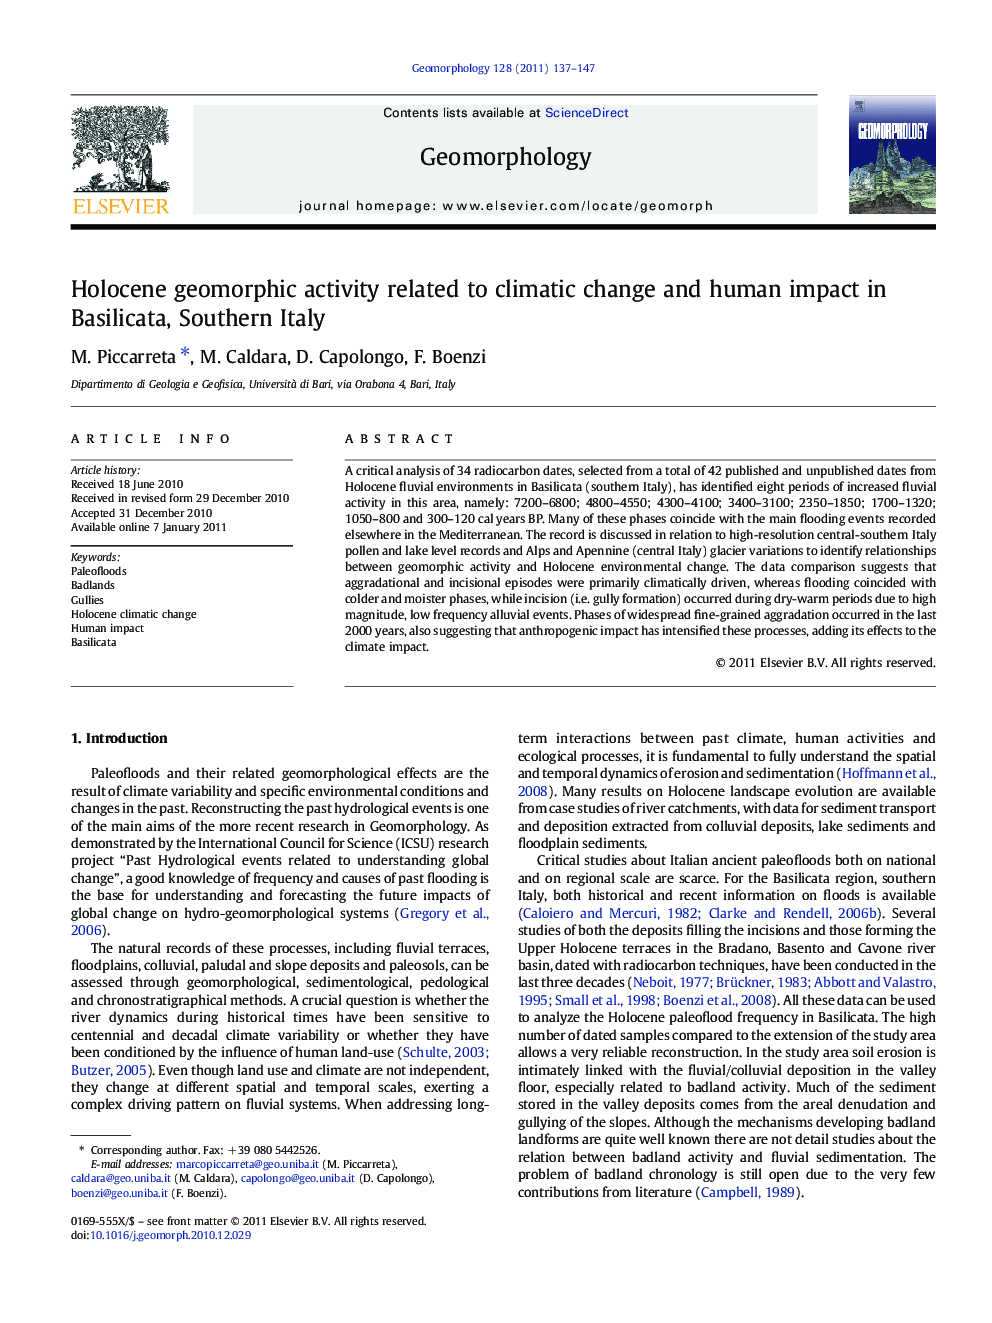 Holocene geomorphic activity related to climatic change and human impact in Basilicata, Southern Italy